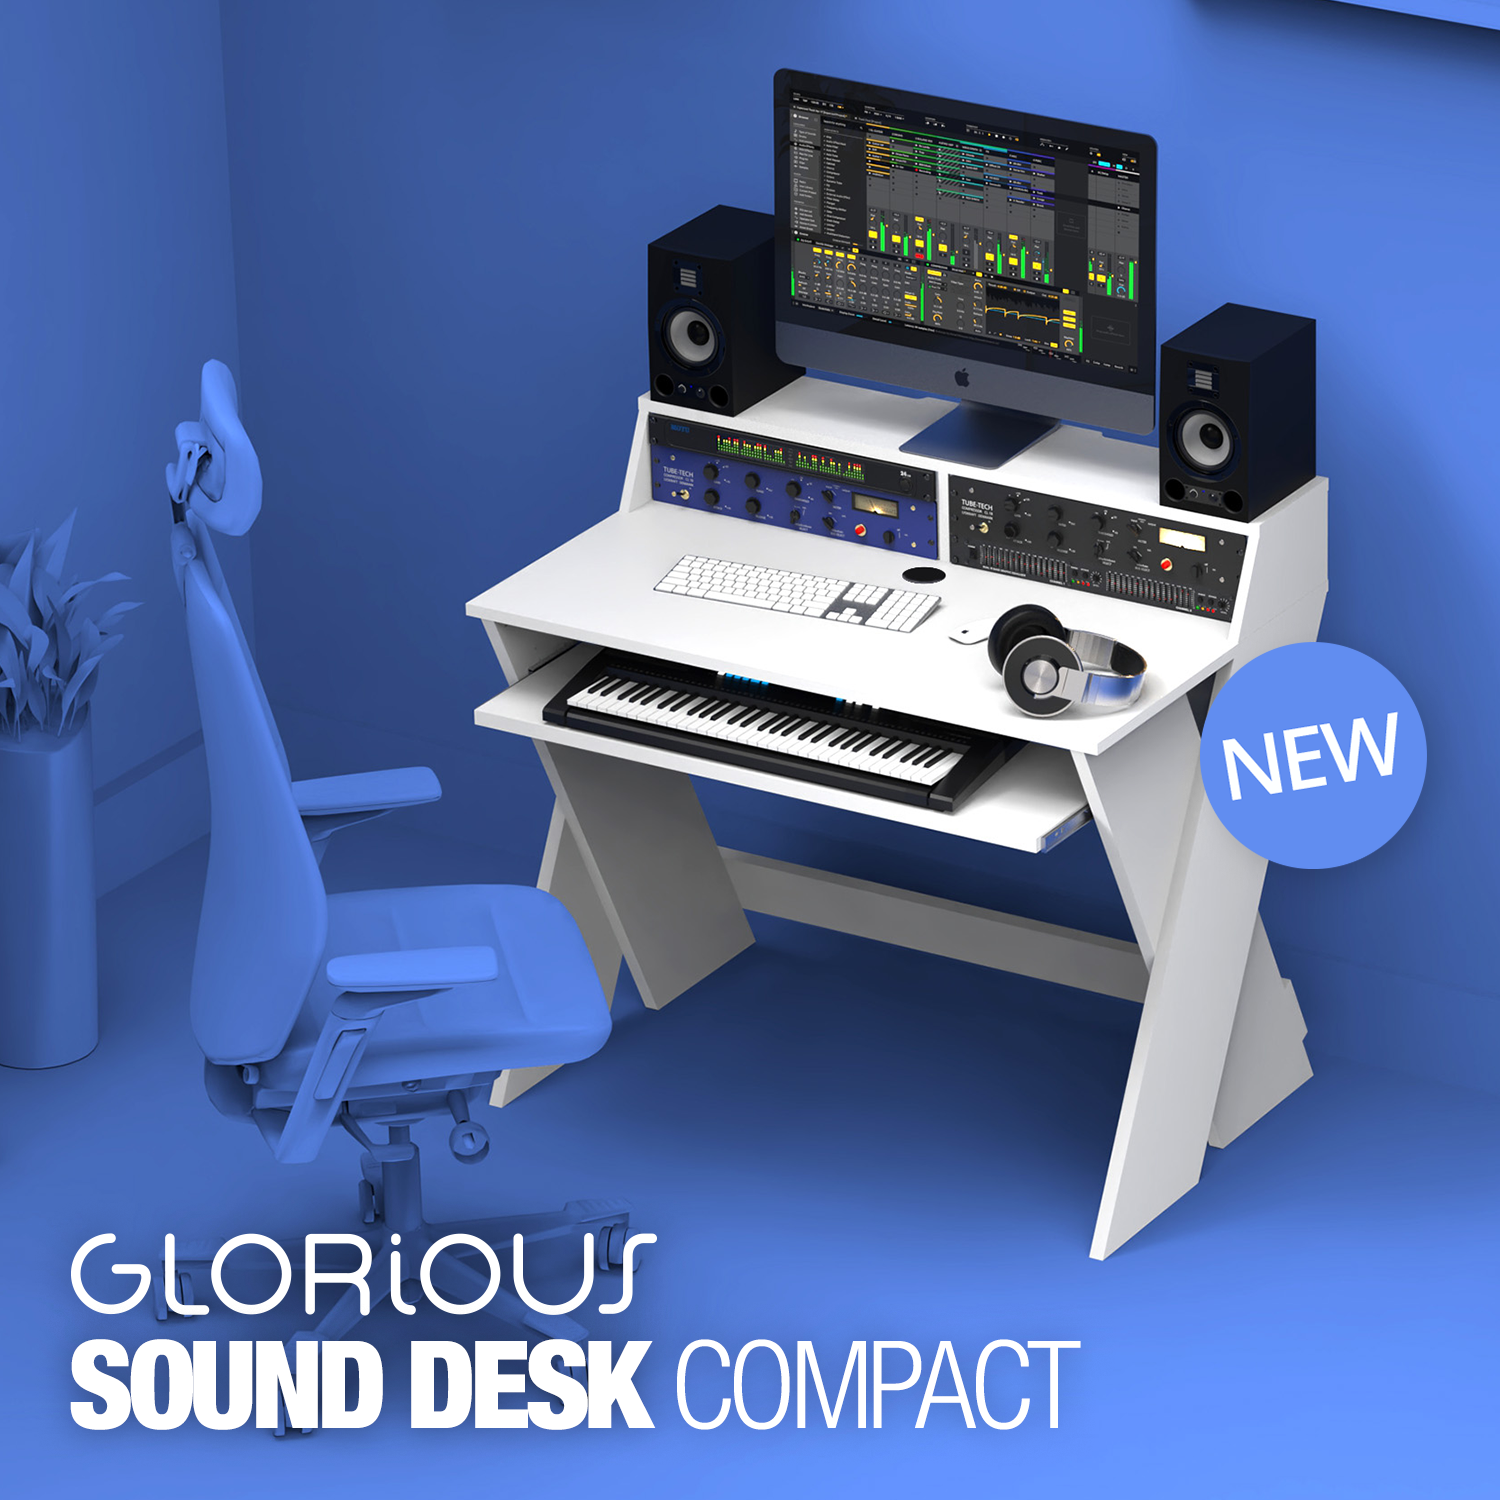 NEW: Glorious Sound Desk Compact